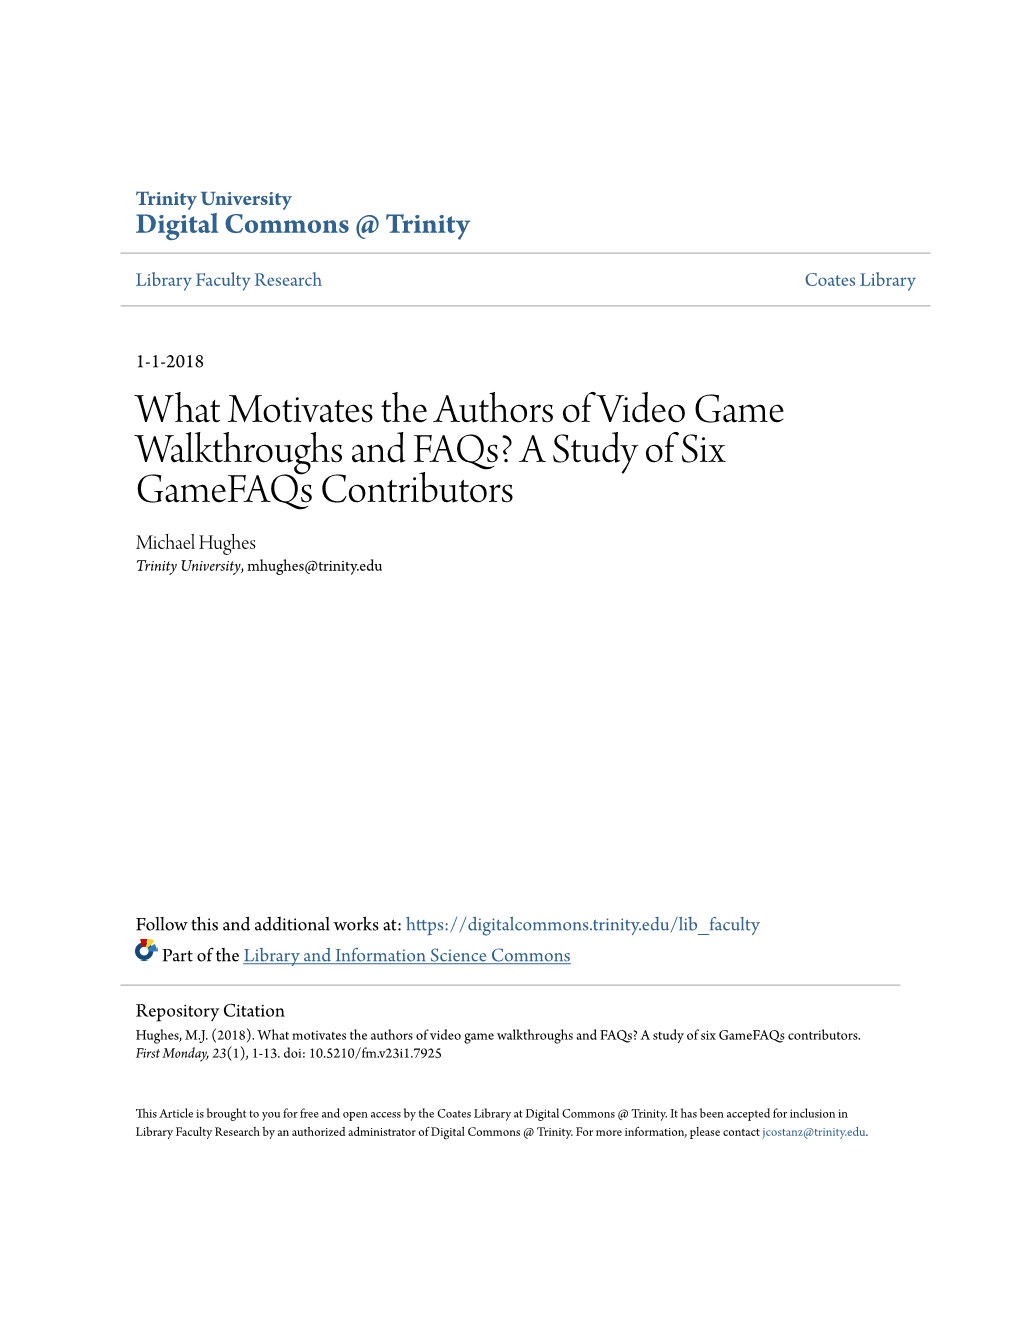 What Motivates the Authors of Video Game Walkthroughs and Faqs? a Study of Six Gamefaqs Contributors Michael Hughes Trinity University, Mhughes@Trinity.Edu